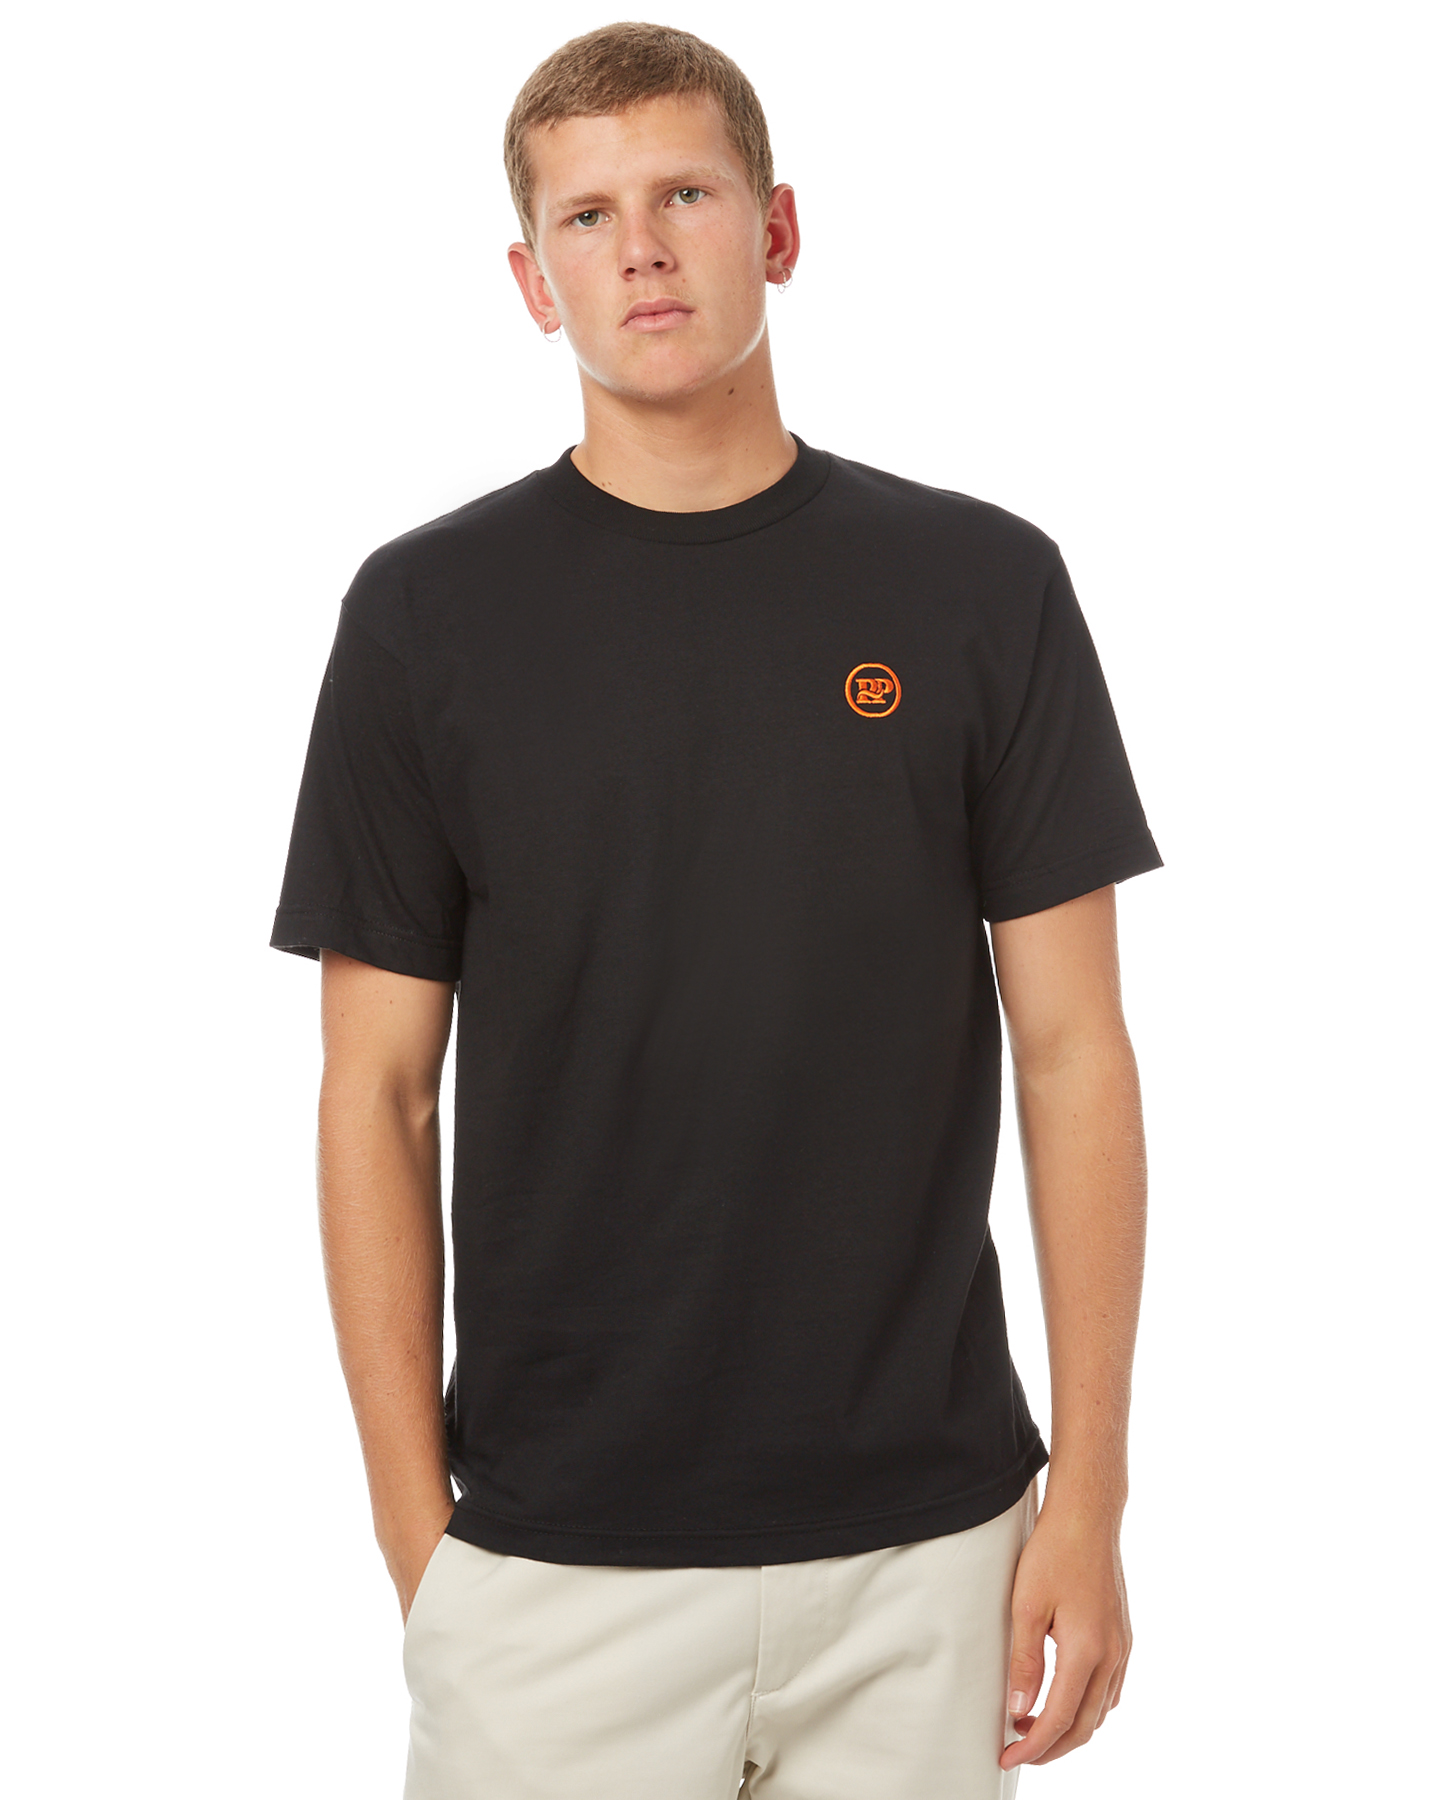 Pass Port Pp Works Embroid Mens Tee - Black | SurfStitch